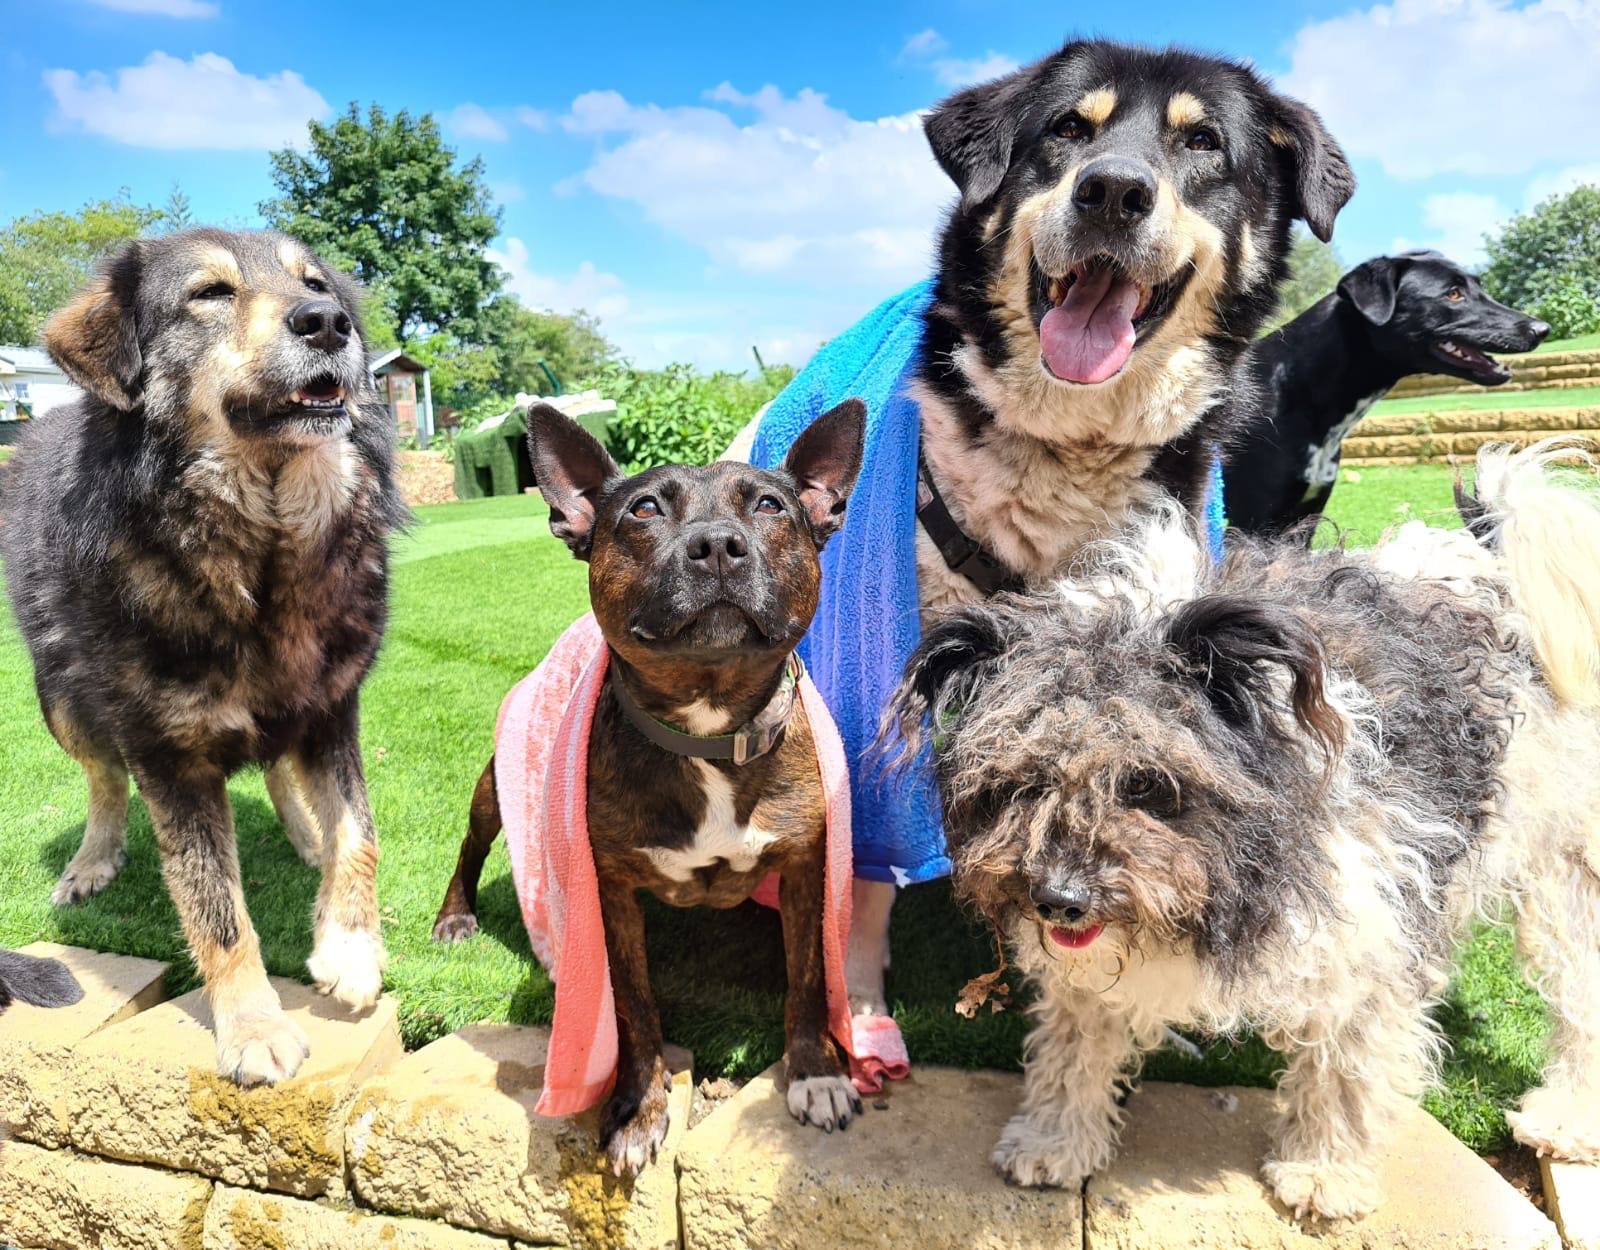 Dogs4Rescue needs your help to build new home for unwanted pooches, The Manc